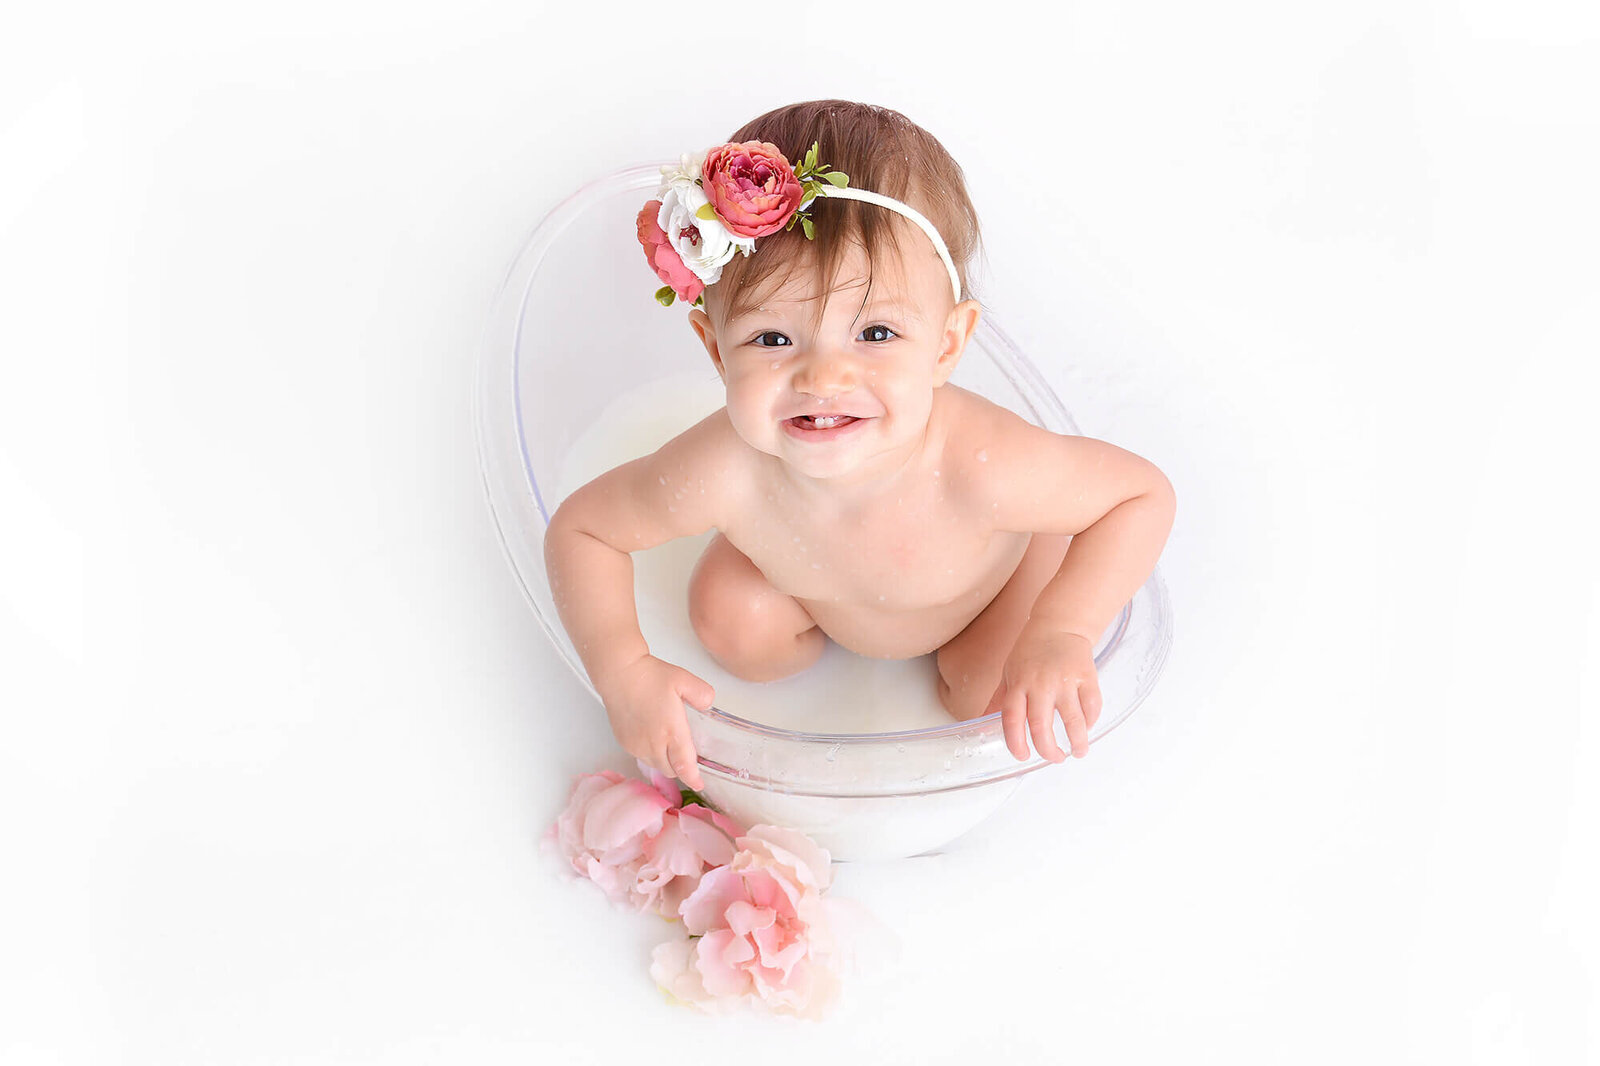 girl smiles while in a milk bath at her first birthday photoshoot in houston